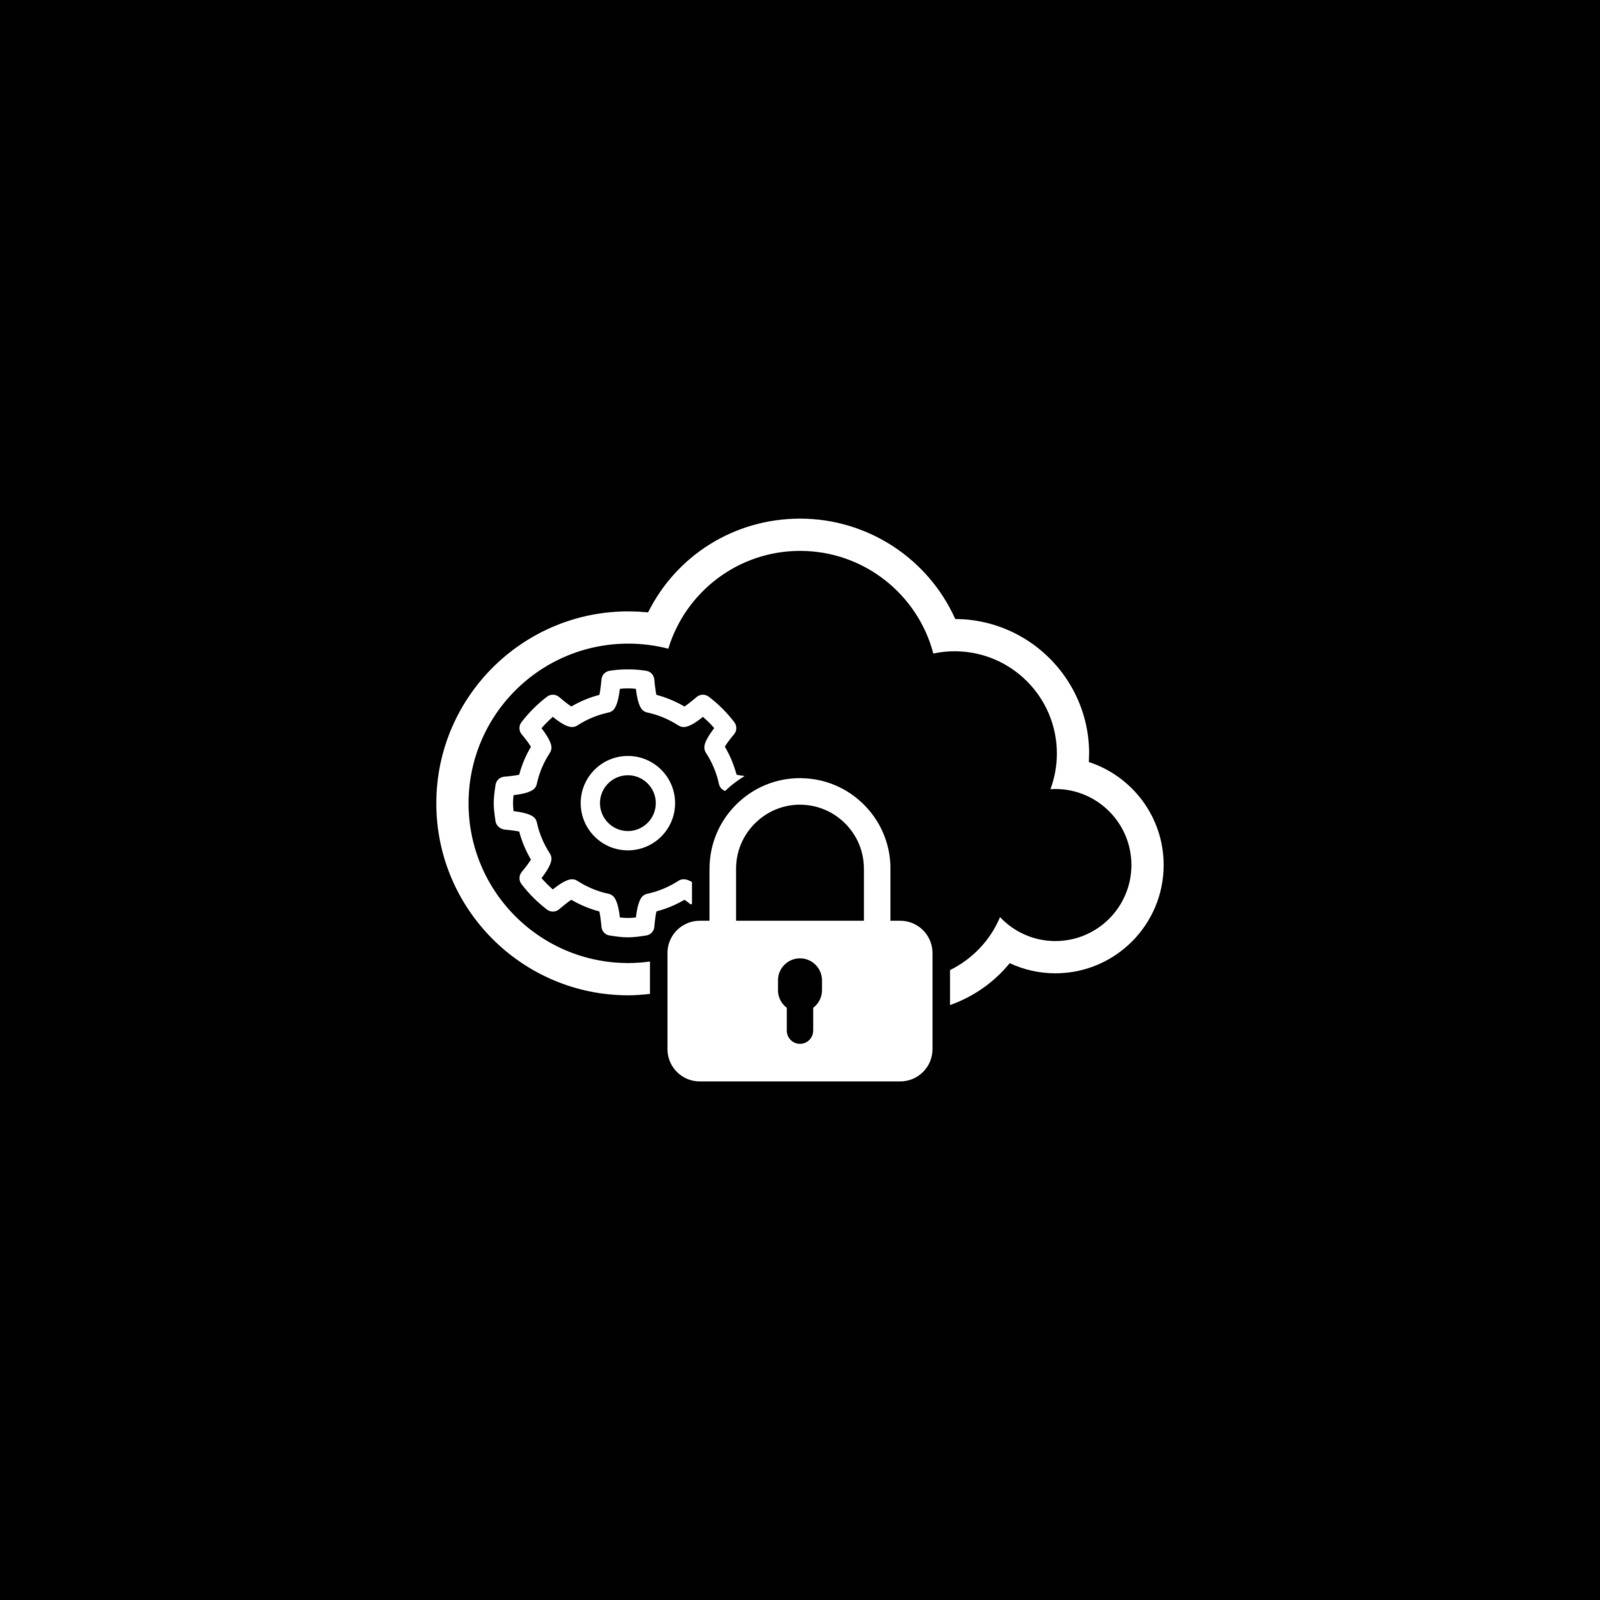 Secured Cloud Processing Icon. Flat Design. Isolated Illustration.